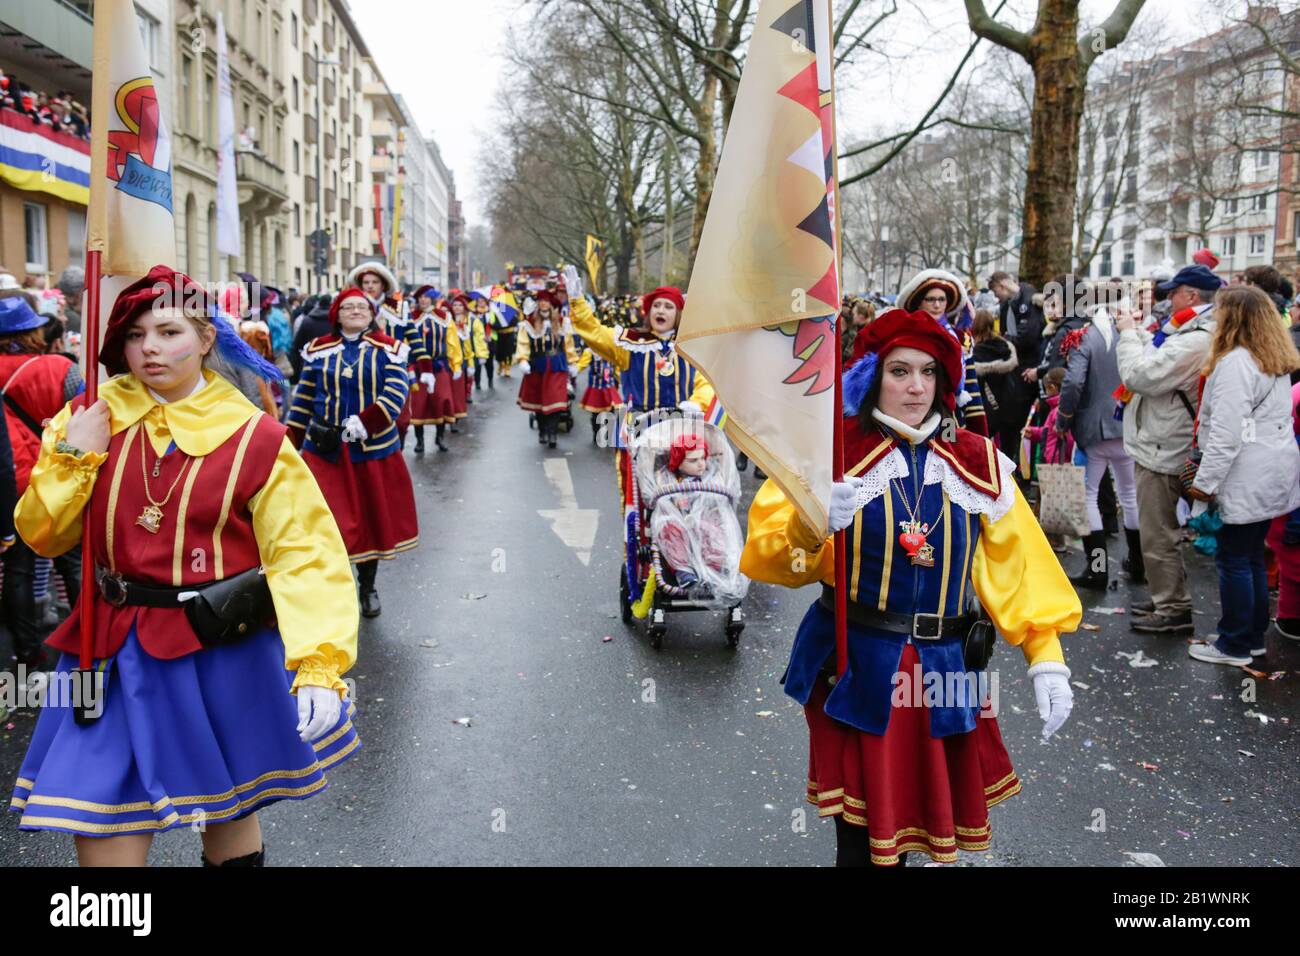 Mainz, Germany. 24th February 2020. Members of the carnival guards Die Wallensteiner march in the Mainz Rose Monday parade. Around half a million people lined the streets of Mainz for the traditional Rose Monday Carnival Parade. The 9 km long parade with over 9,000 participants is one of the three large Rose Monday Parades in Germany. Stock Photo